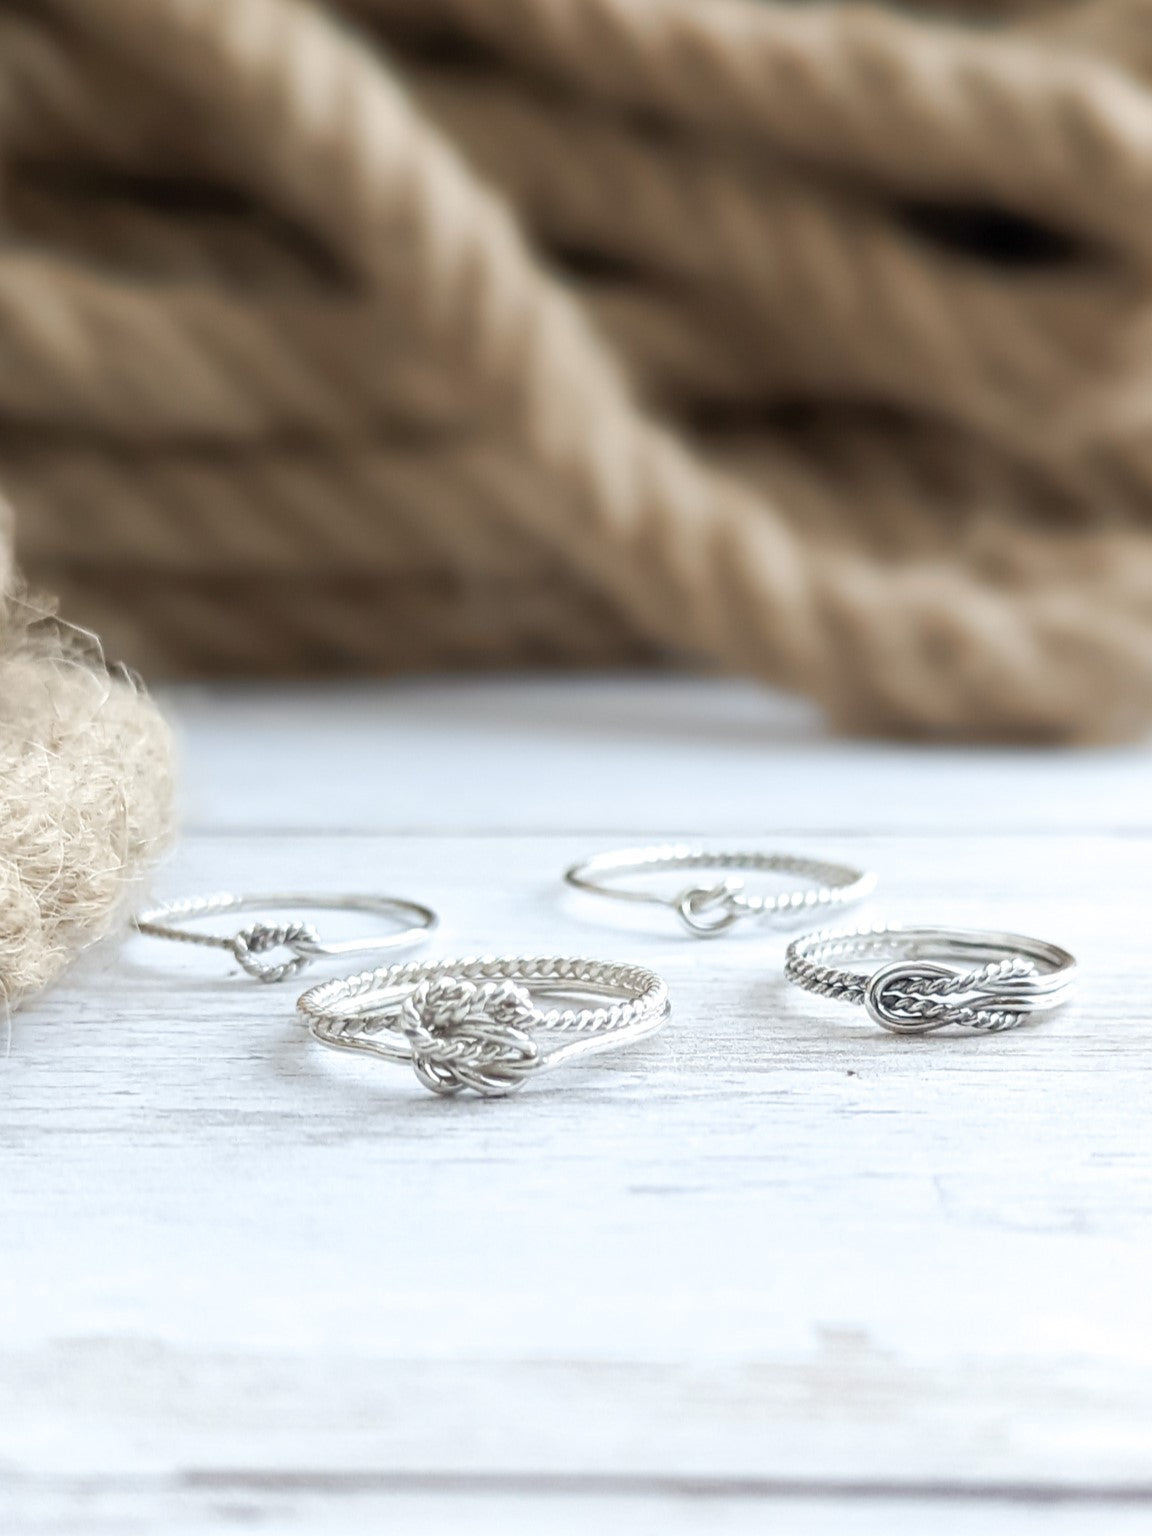 Silver friendship knot rings, twisted rope wire